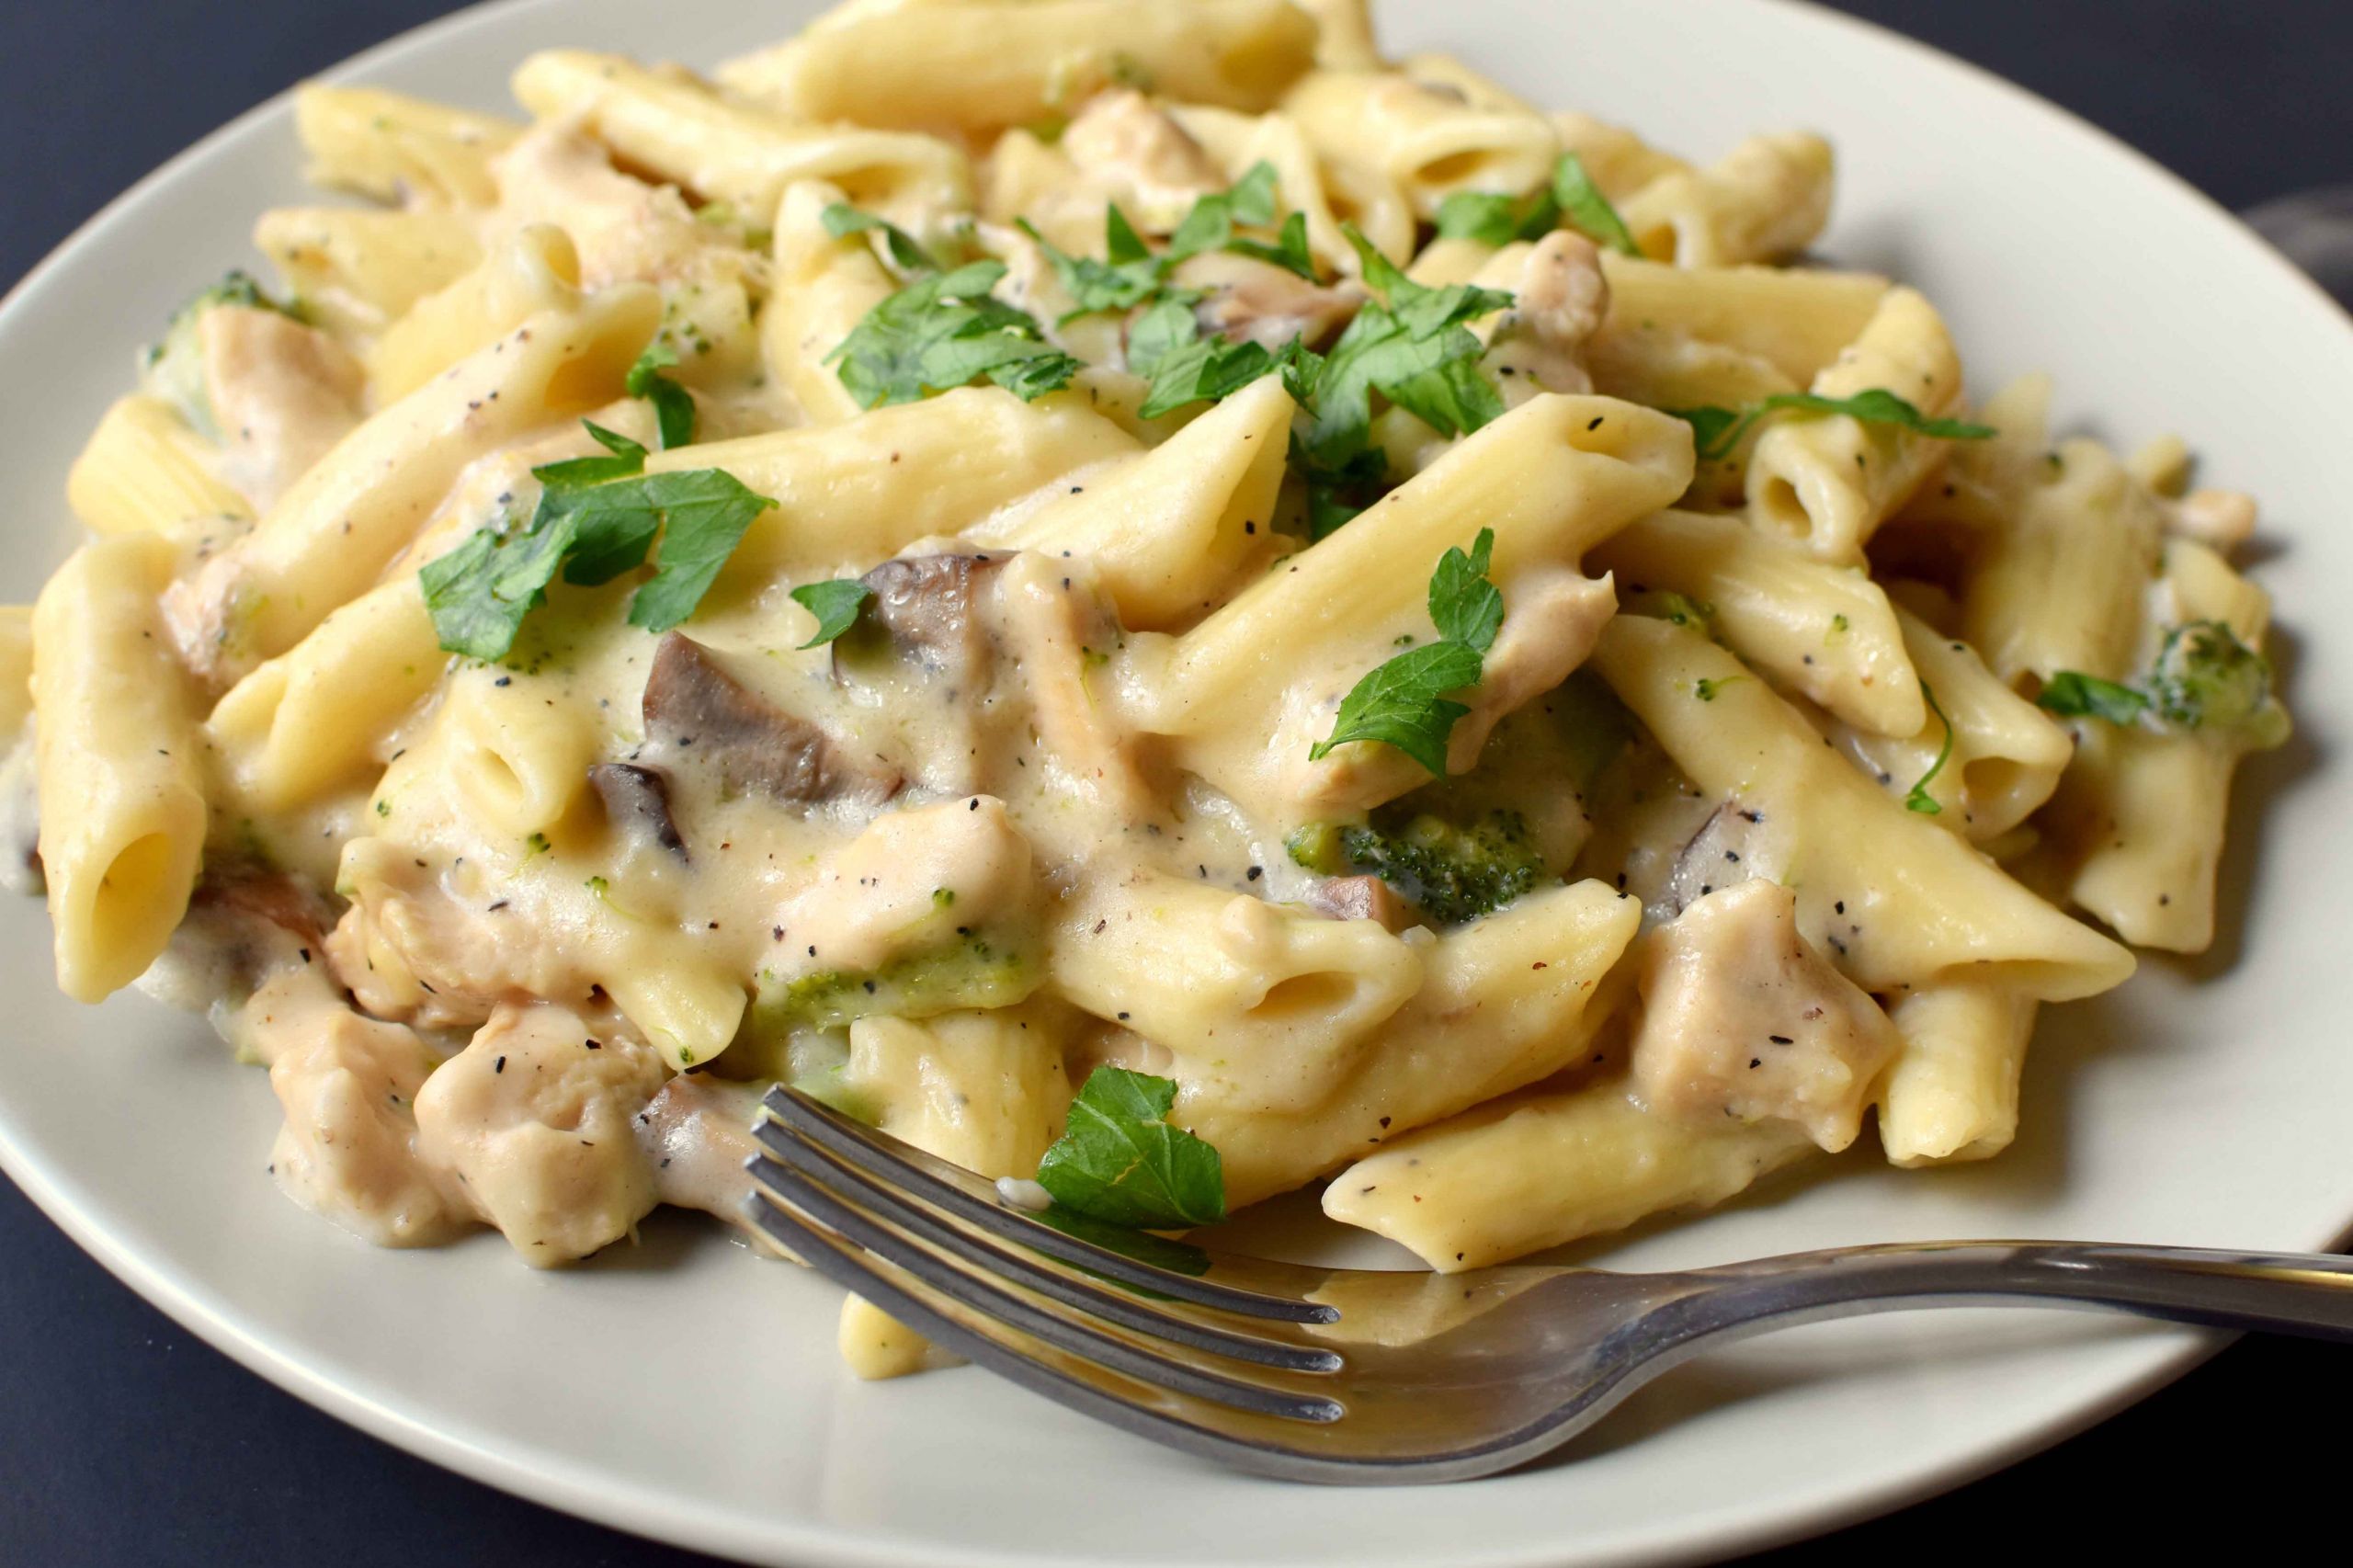 Chicken and Pasta Sauces Lovely Chicken Pasta with White Sauce Pepper Delight